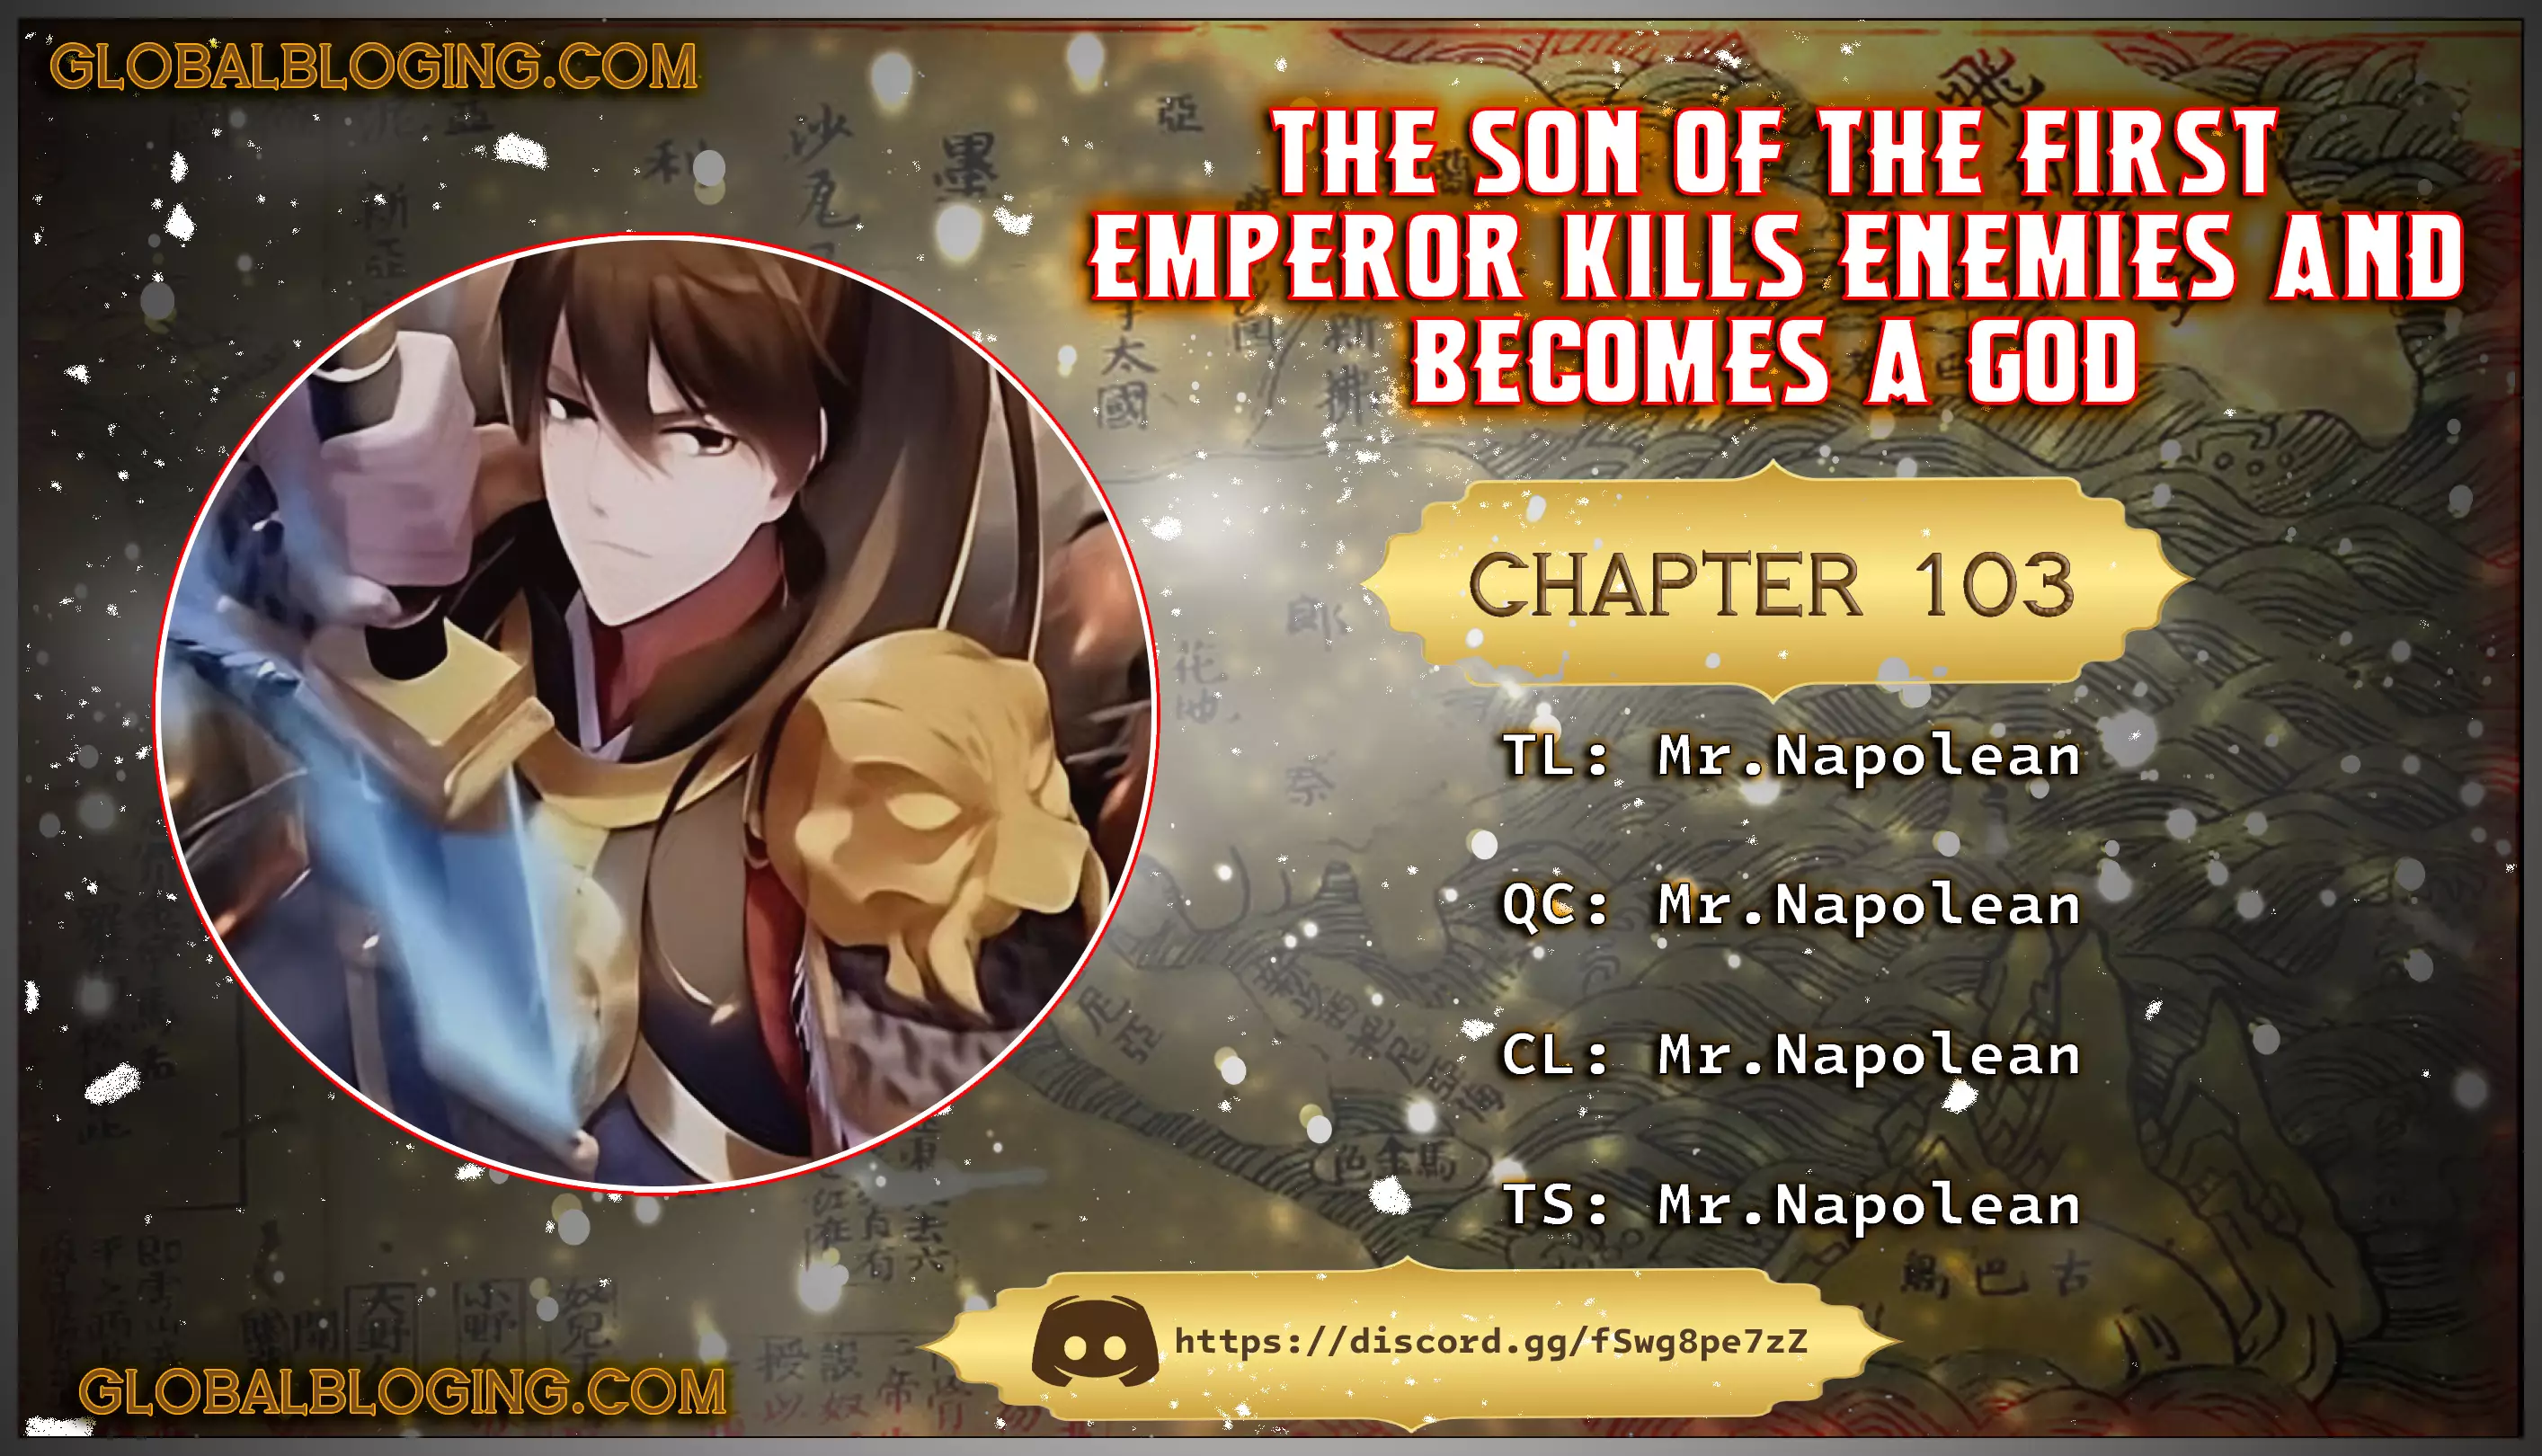 The Son Of The First Emperor Kills Enemies And Becomes A God - 103 page 1-7af90ea4